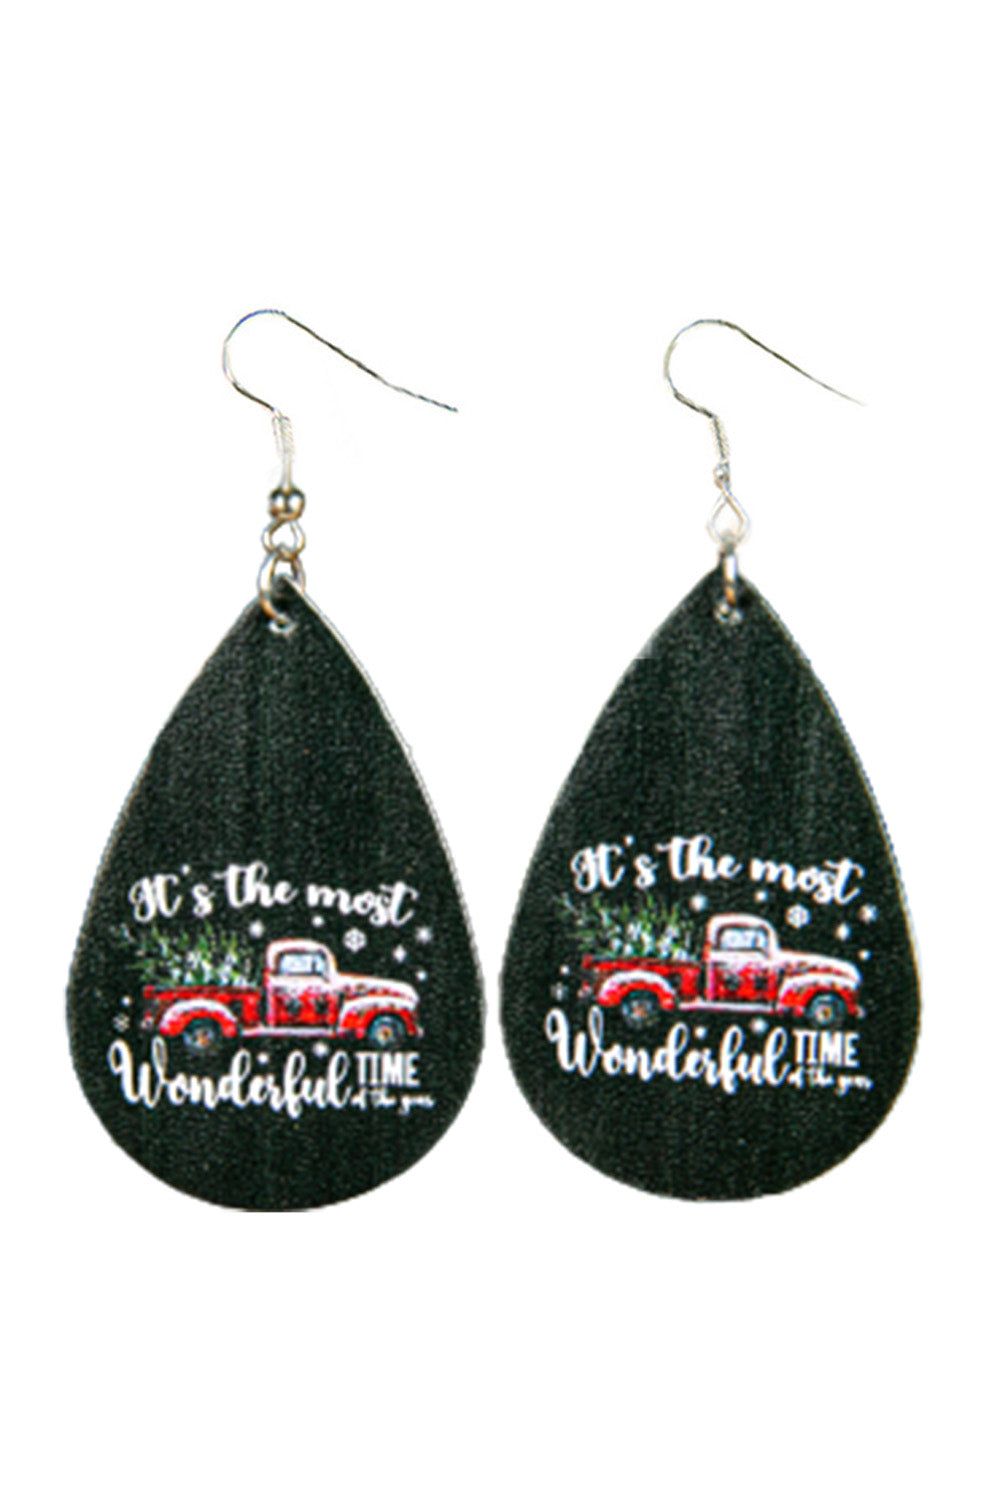 It's The most Wonderful TIME of the year Pleather Earrings Jewelry JT's Designer Fashion